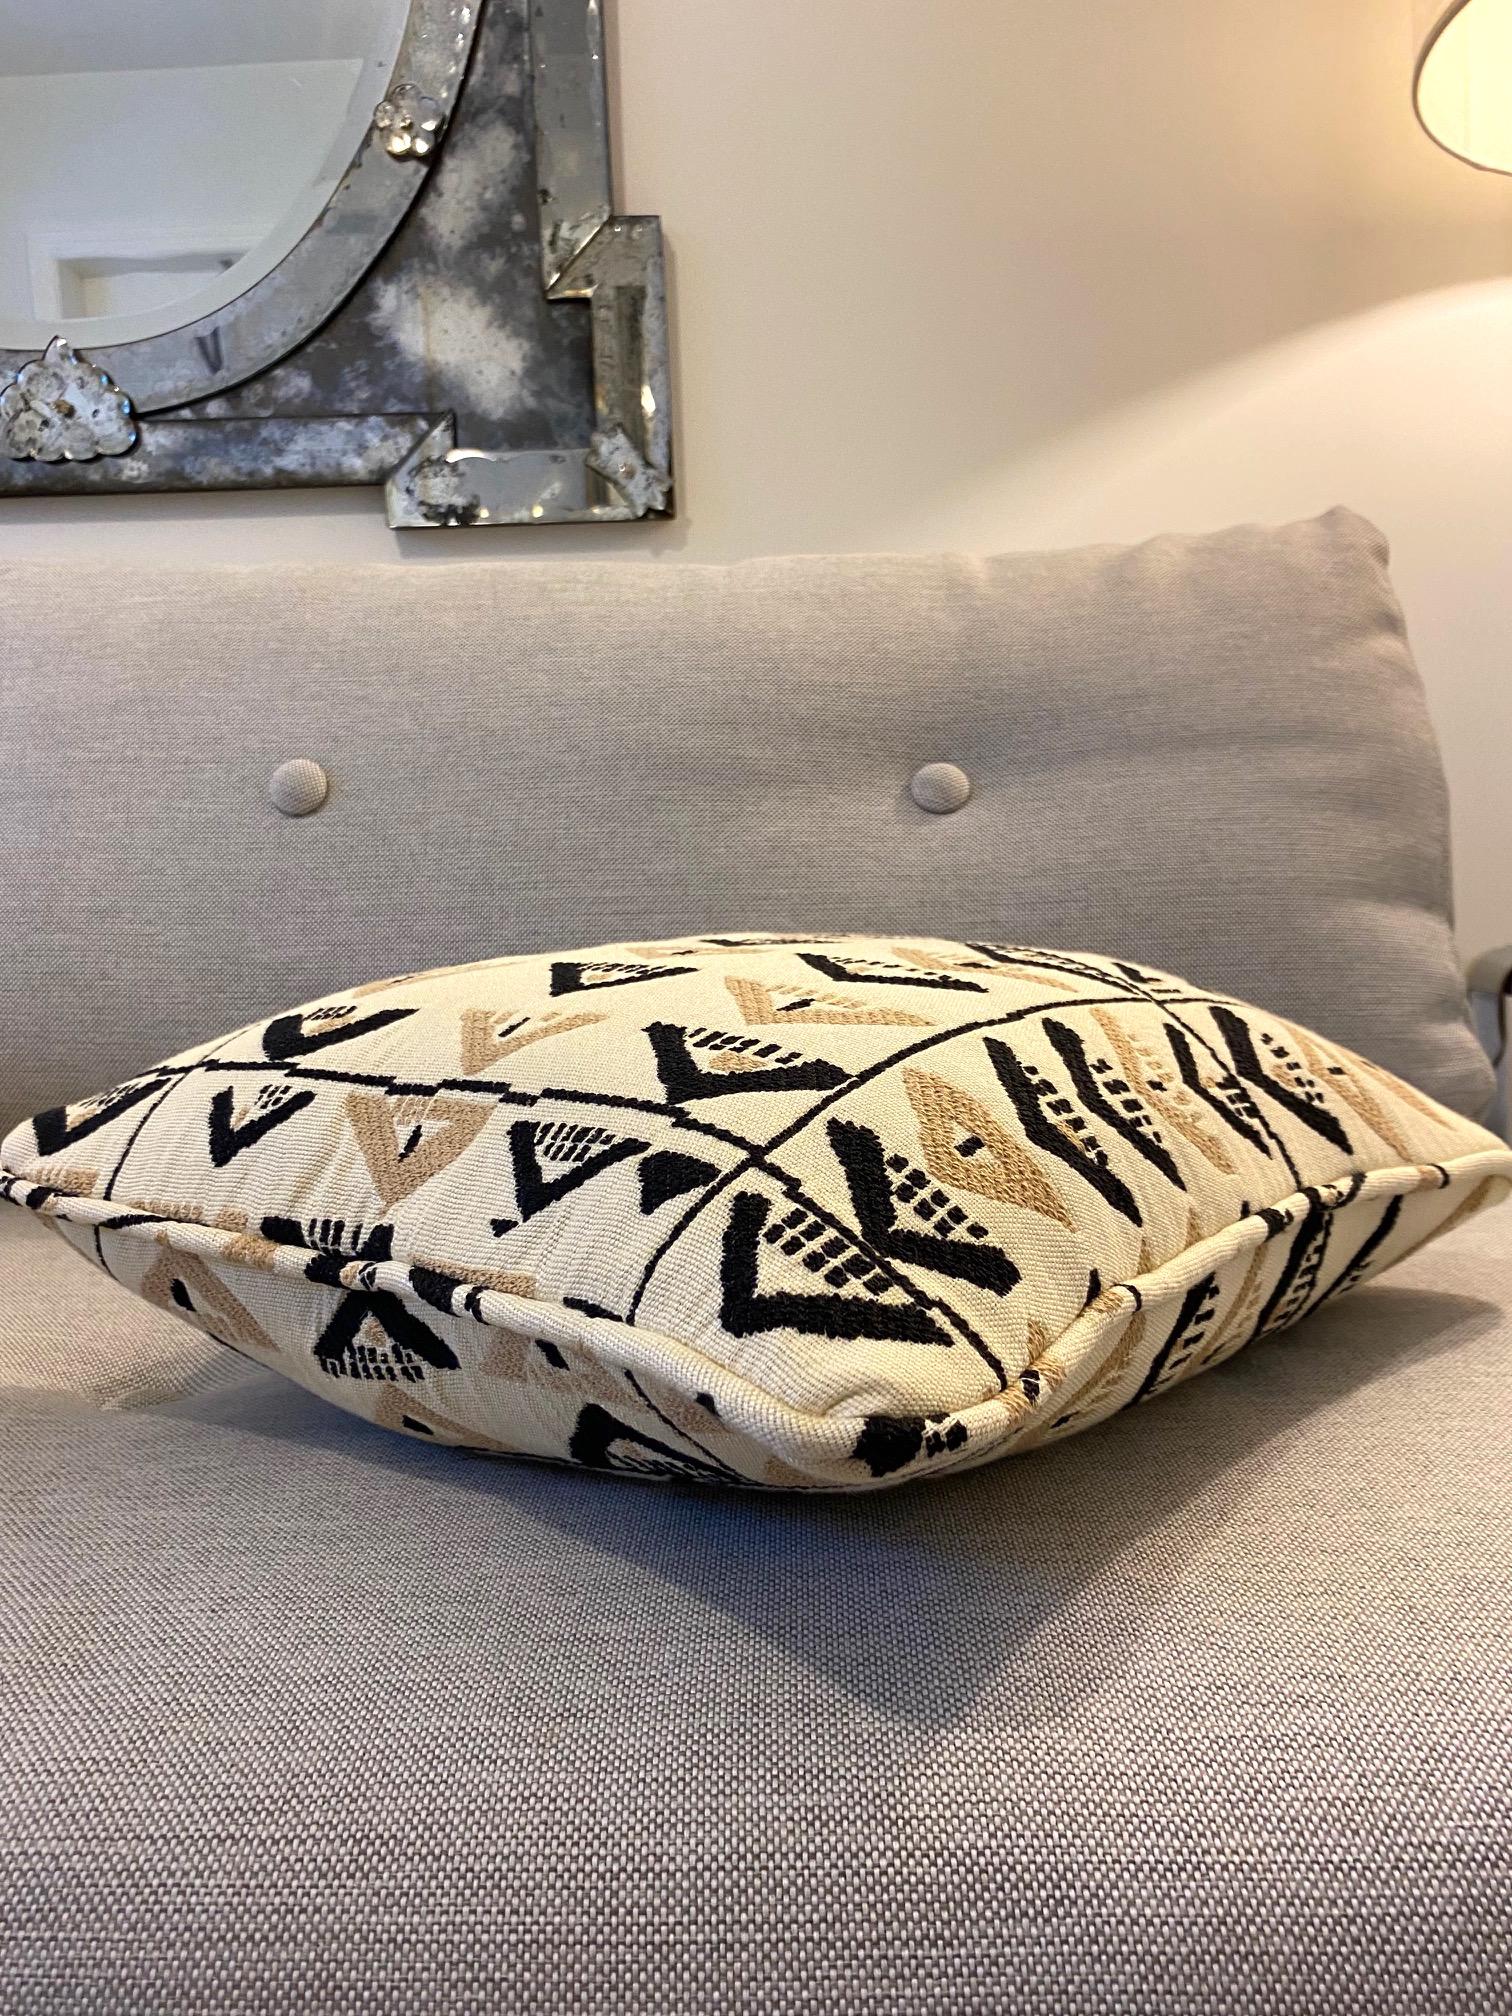 Embroidered Pierre Frey Throw Pillow with Vintage African Kuba Print in Beige and Black